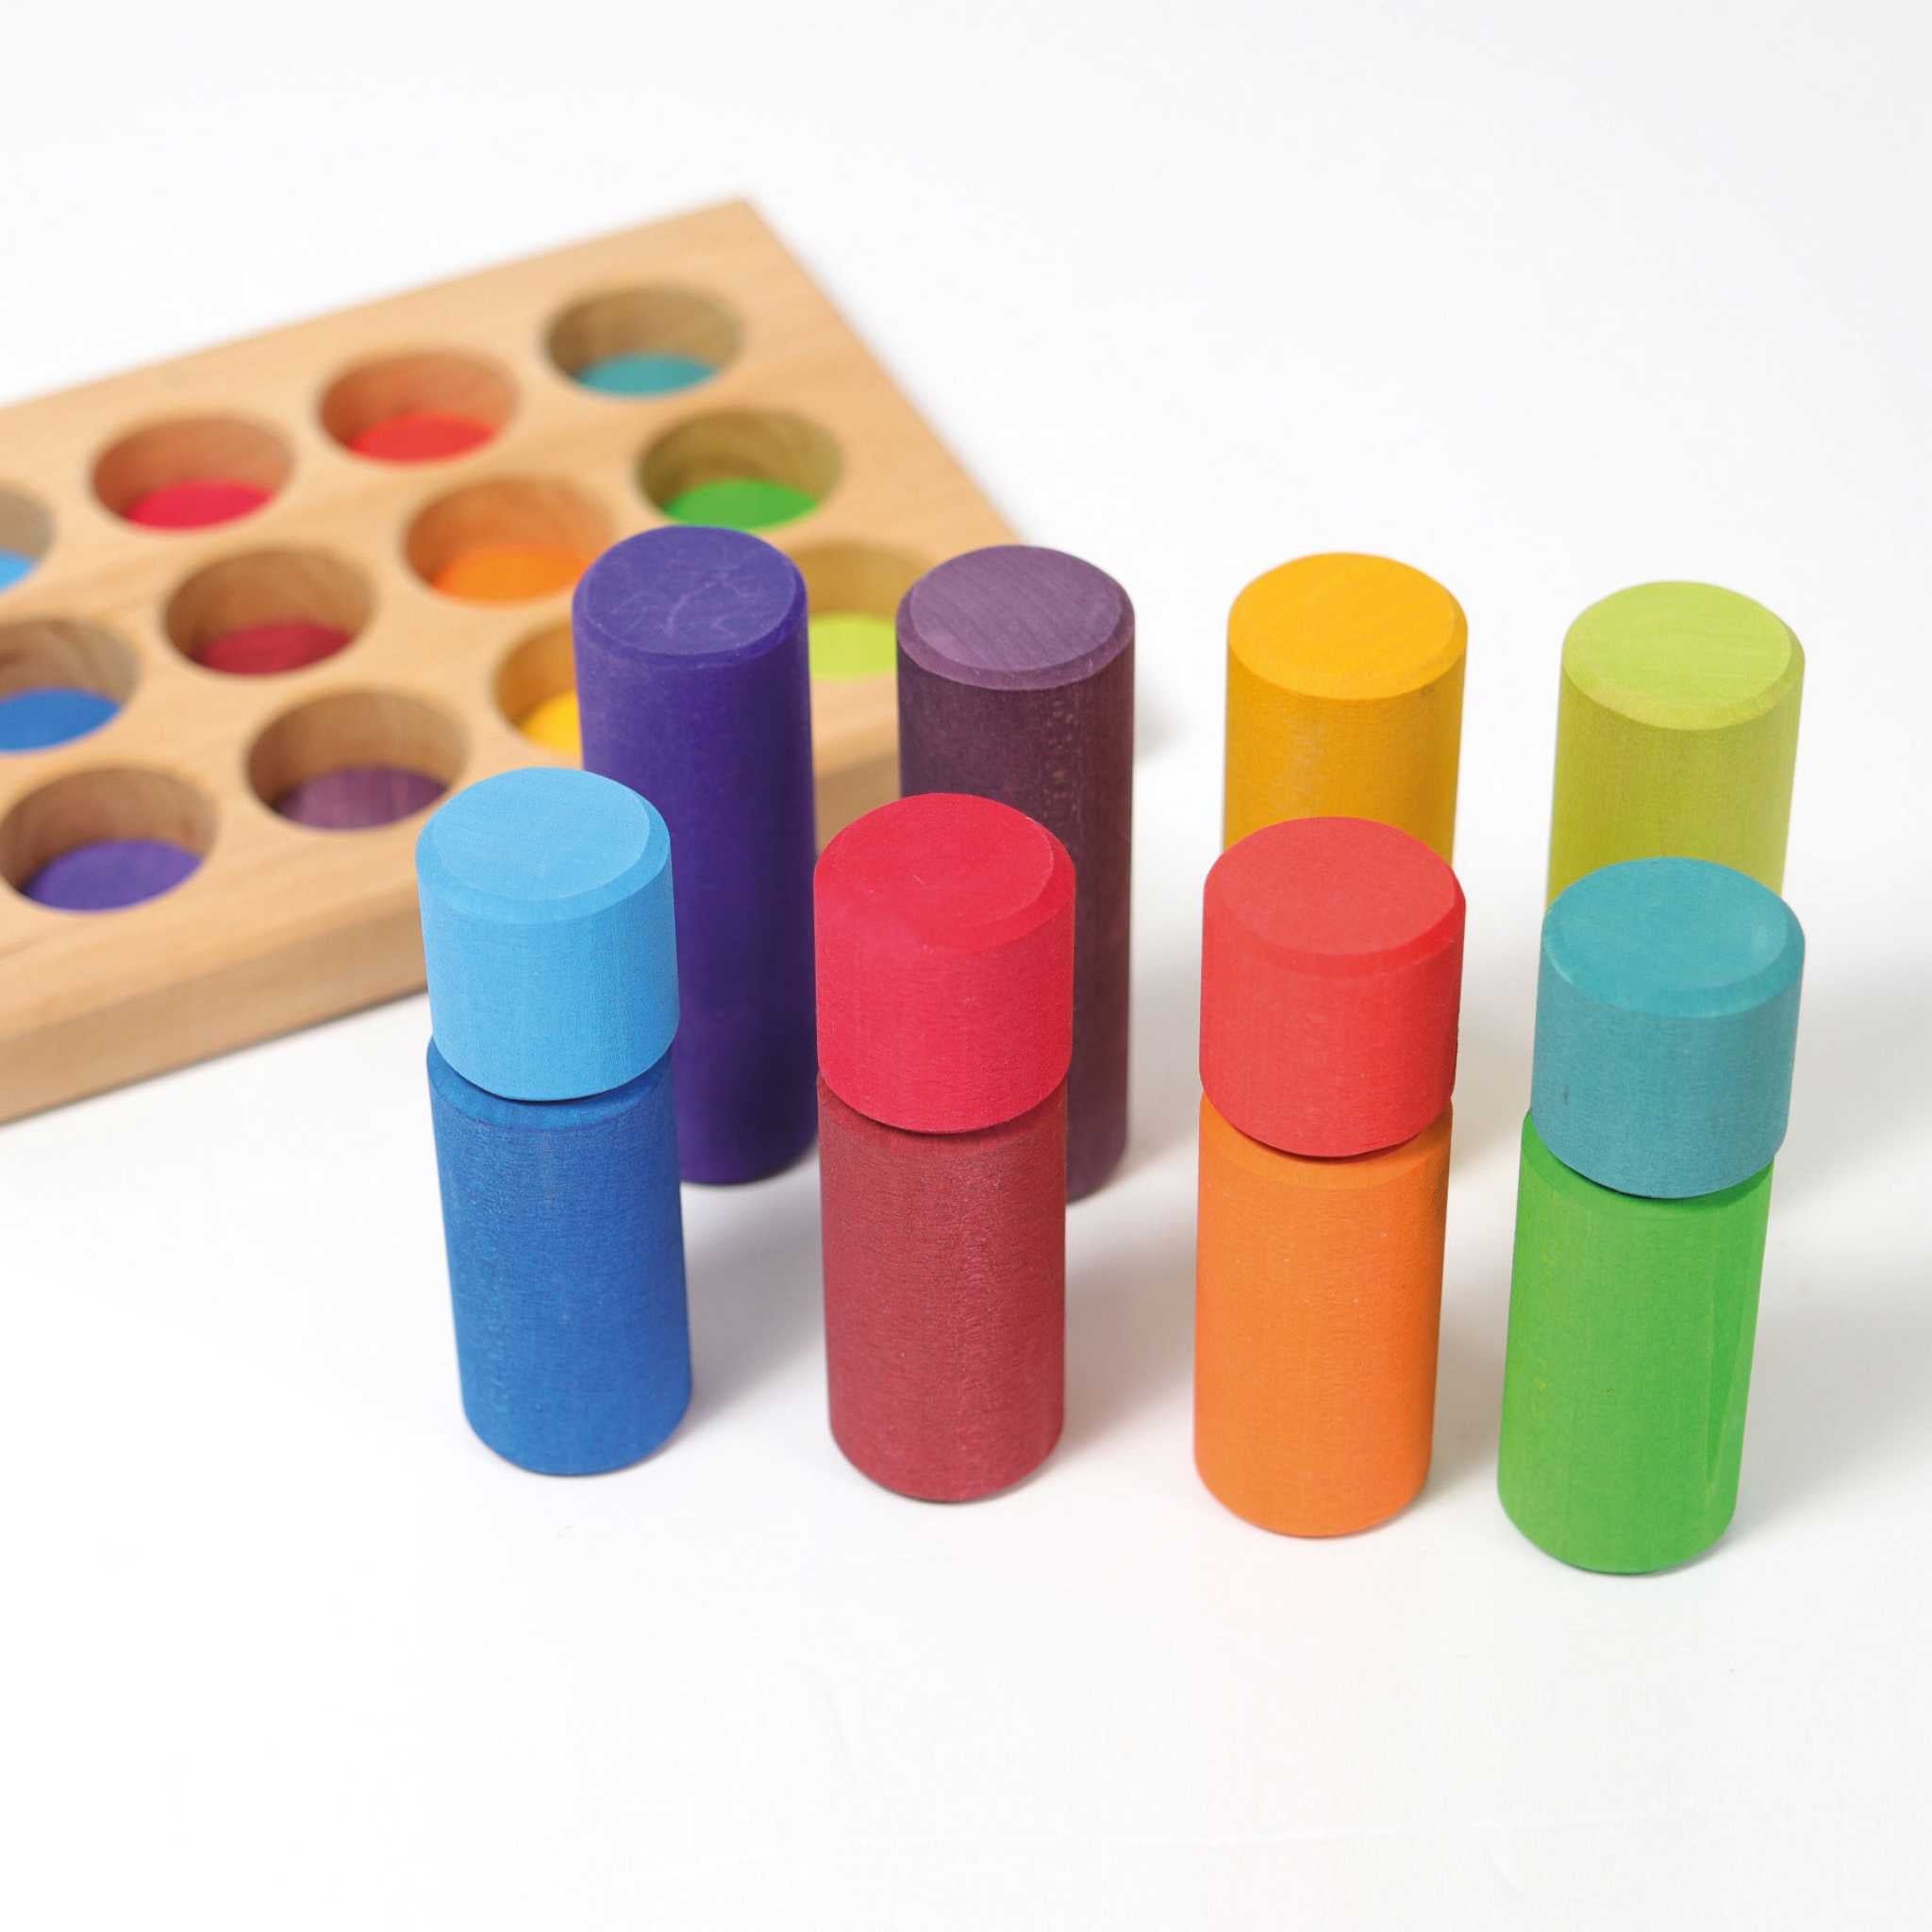 Grimm's Stacking Game Small Rainbow Rollers Different Sizes Stacked 